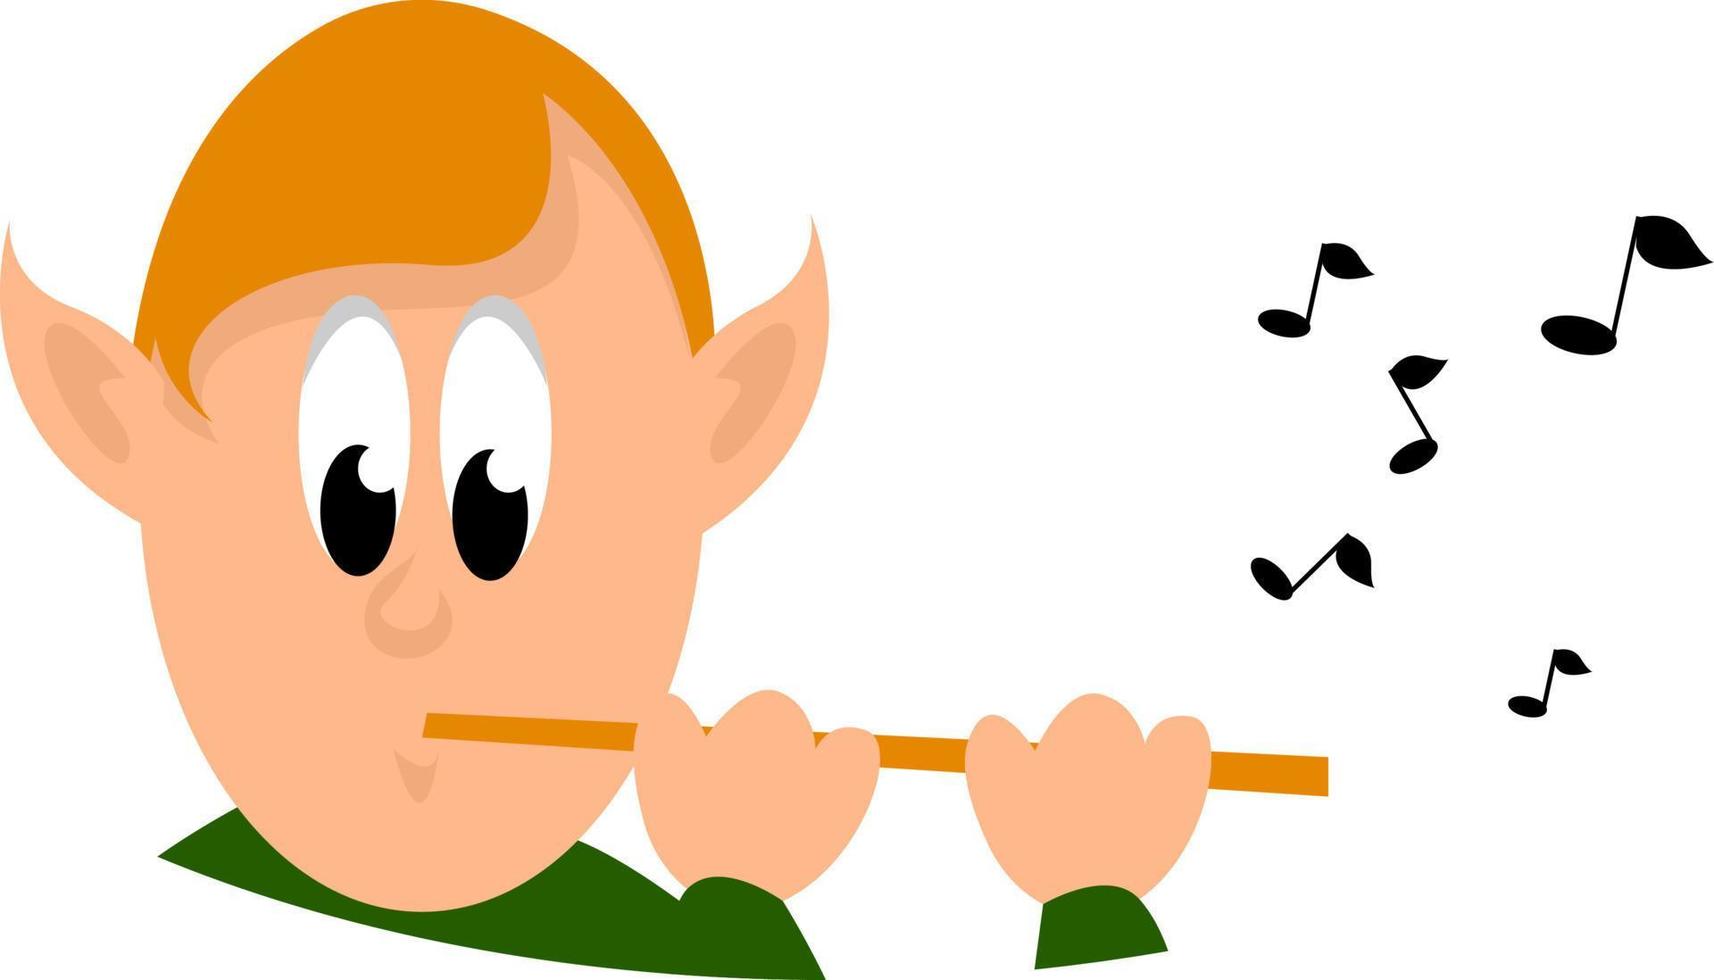 Boy with flute, illustration, vector on white background.